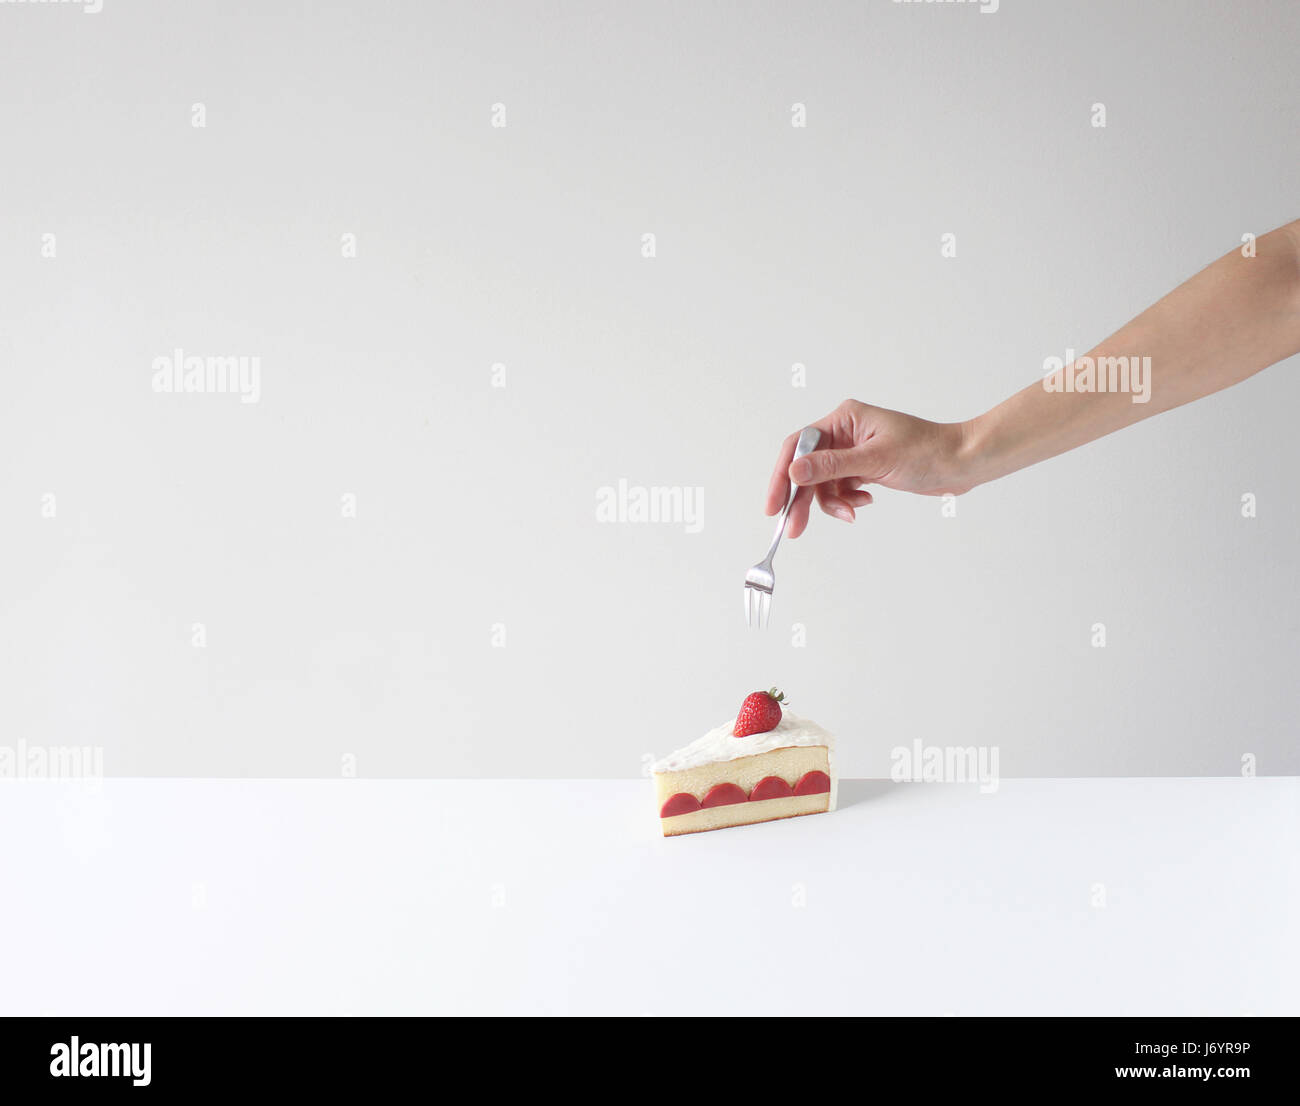 Hand holding a fork about to eat a slice of cake Stock Photo